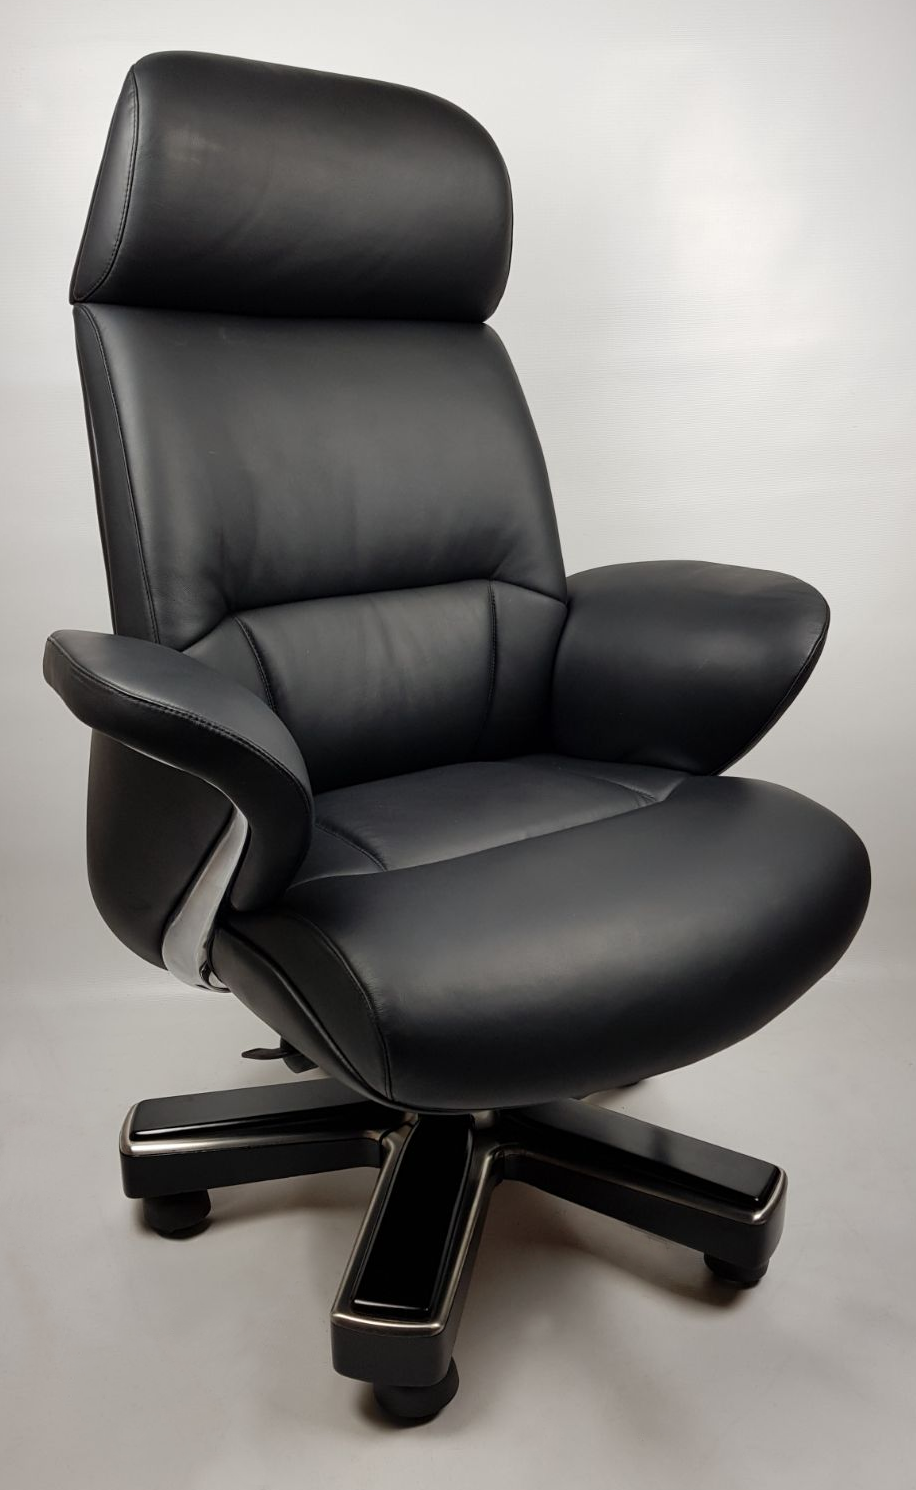 Large Luxury Executive Office Chair with Genuine Black Leather - YS1605A North Yorkshire